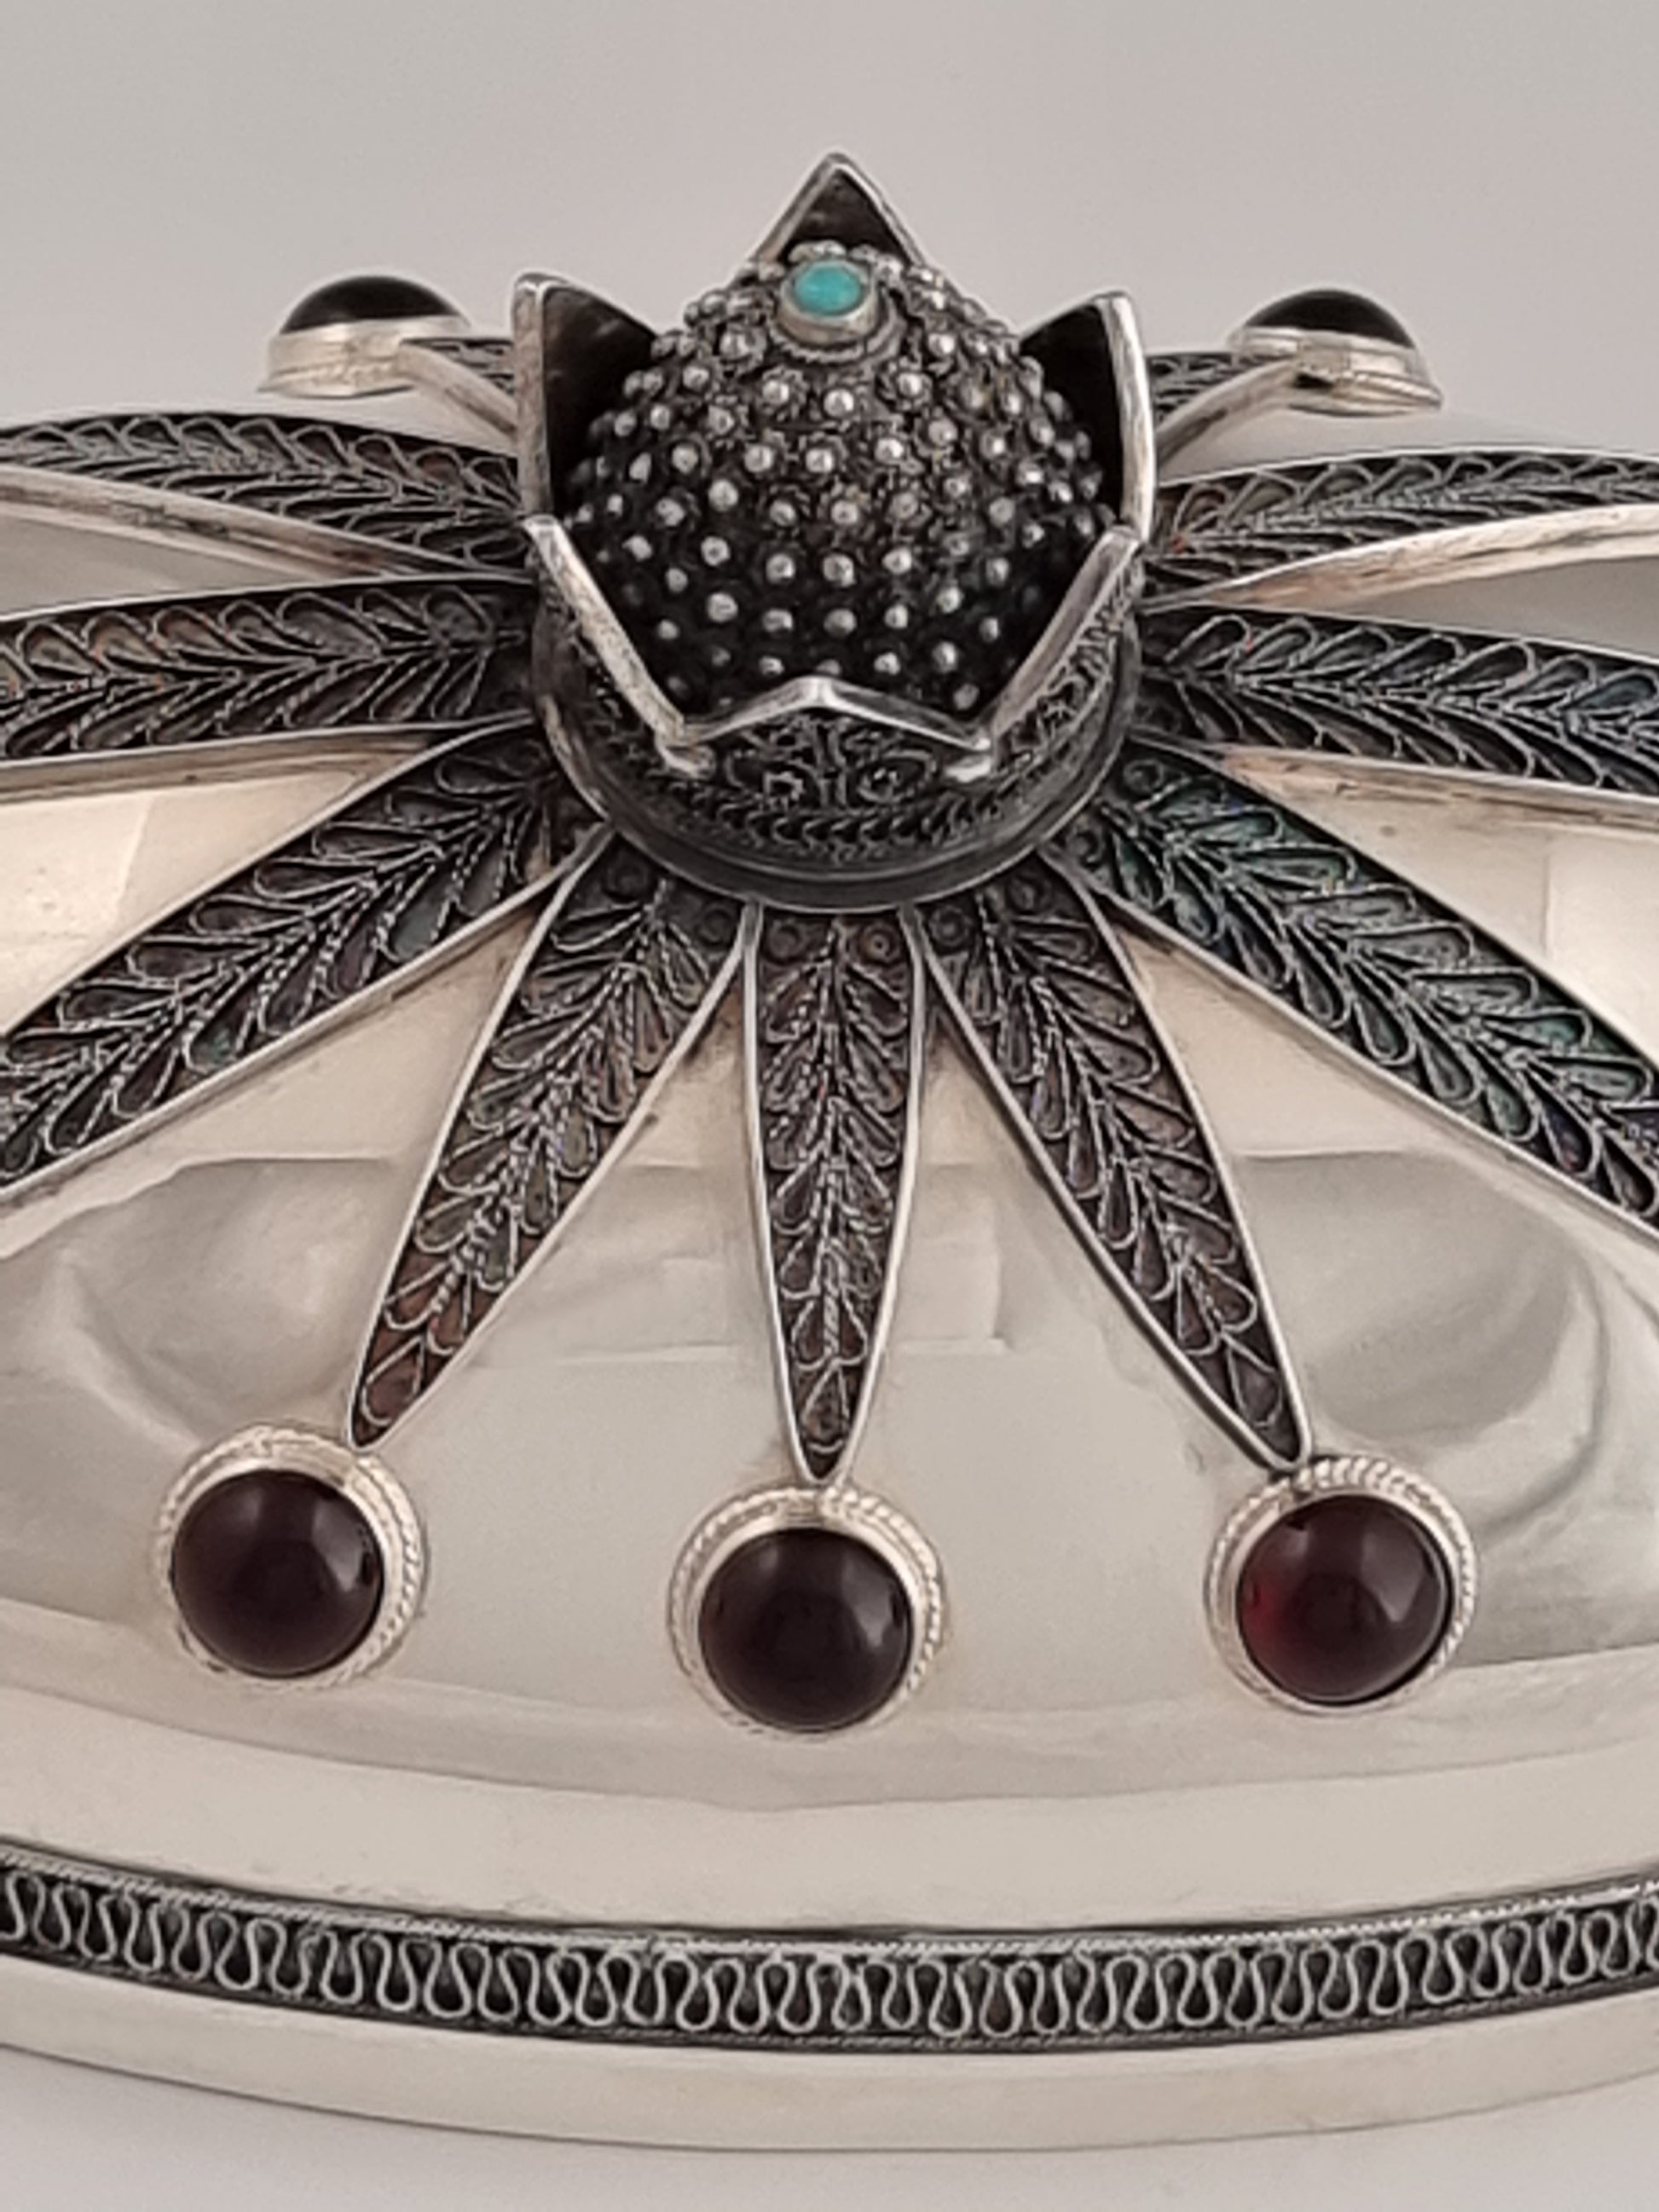 The super detailed crown of this box is topped with a single turquoise stone.